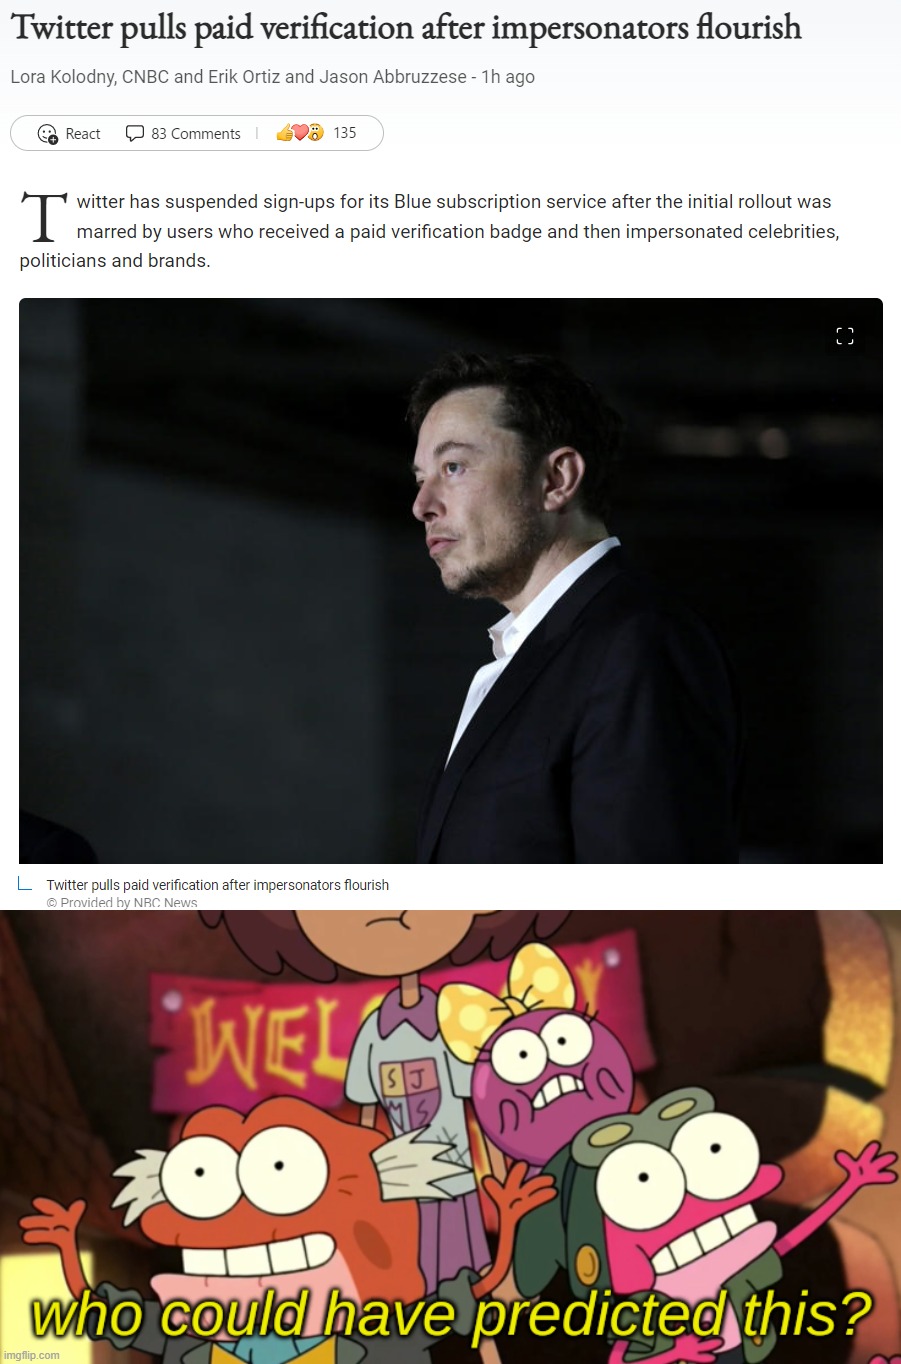 That's weird. That's so weird. | image tagged in twitter pulls paid verification,who could have predicted this,trolls,internet trolls,welcome to the internets,elon musk | made w/ Imgflip meme maker